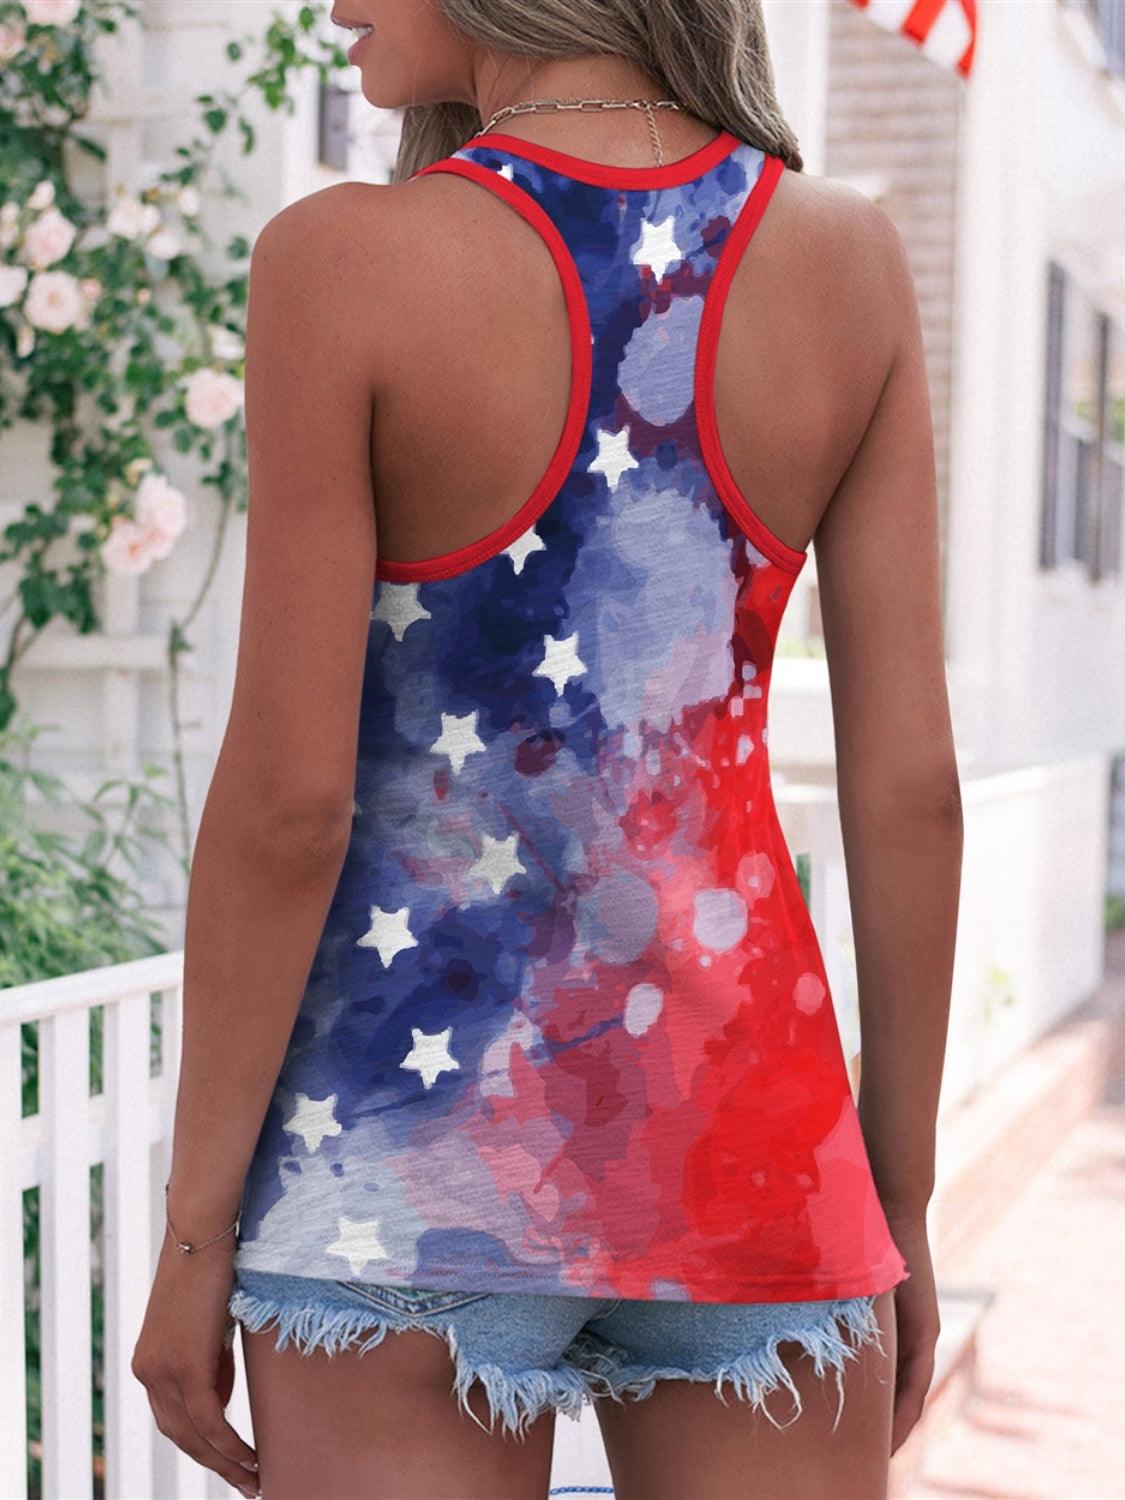 a woman wearing a red, white and blue tank top